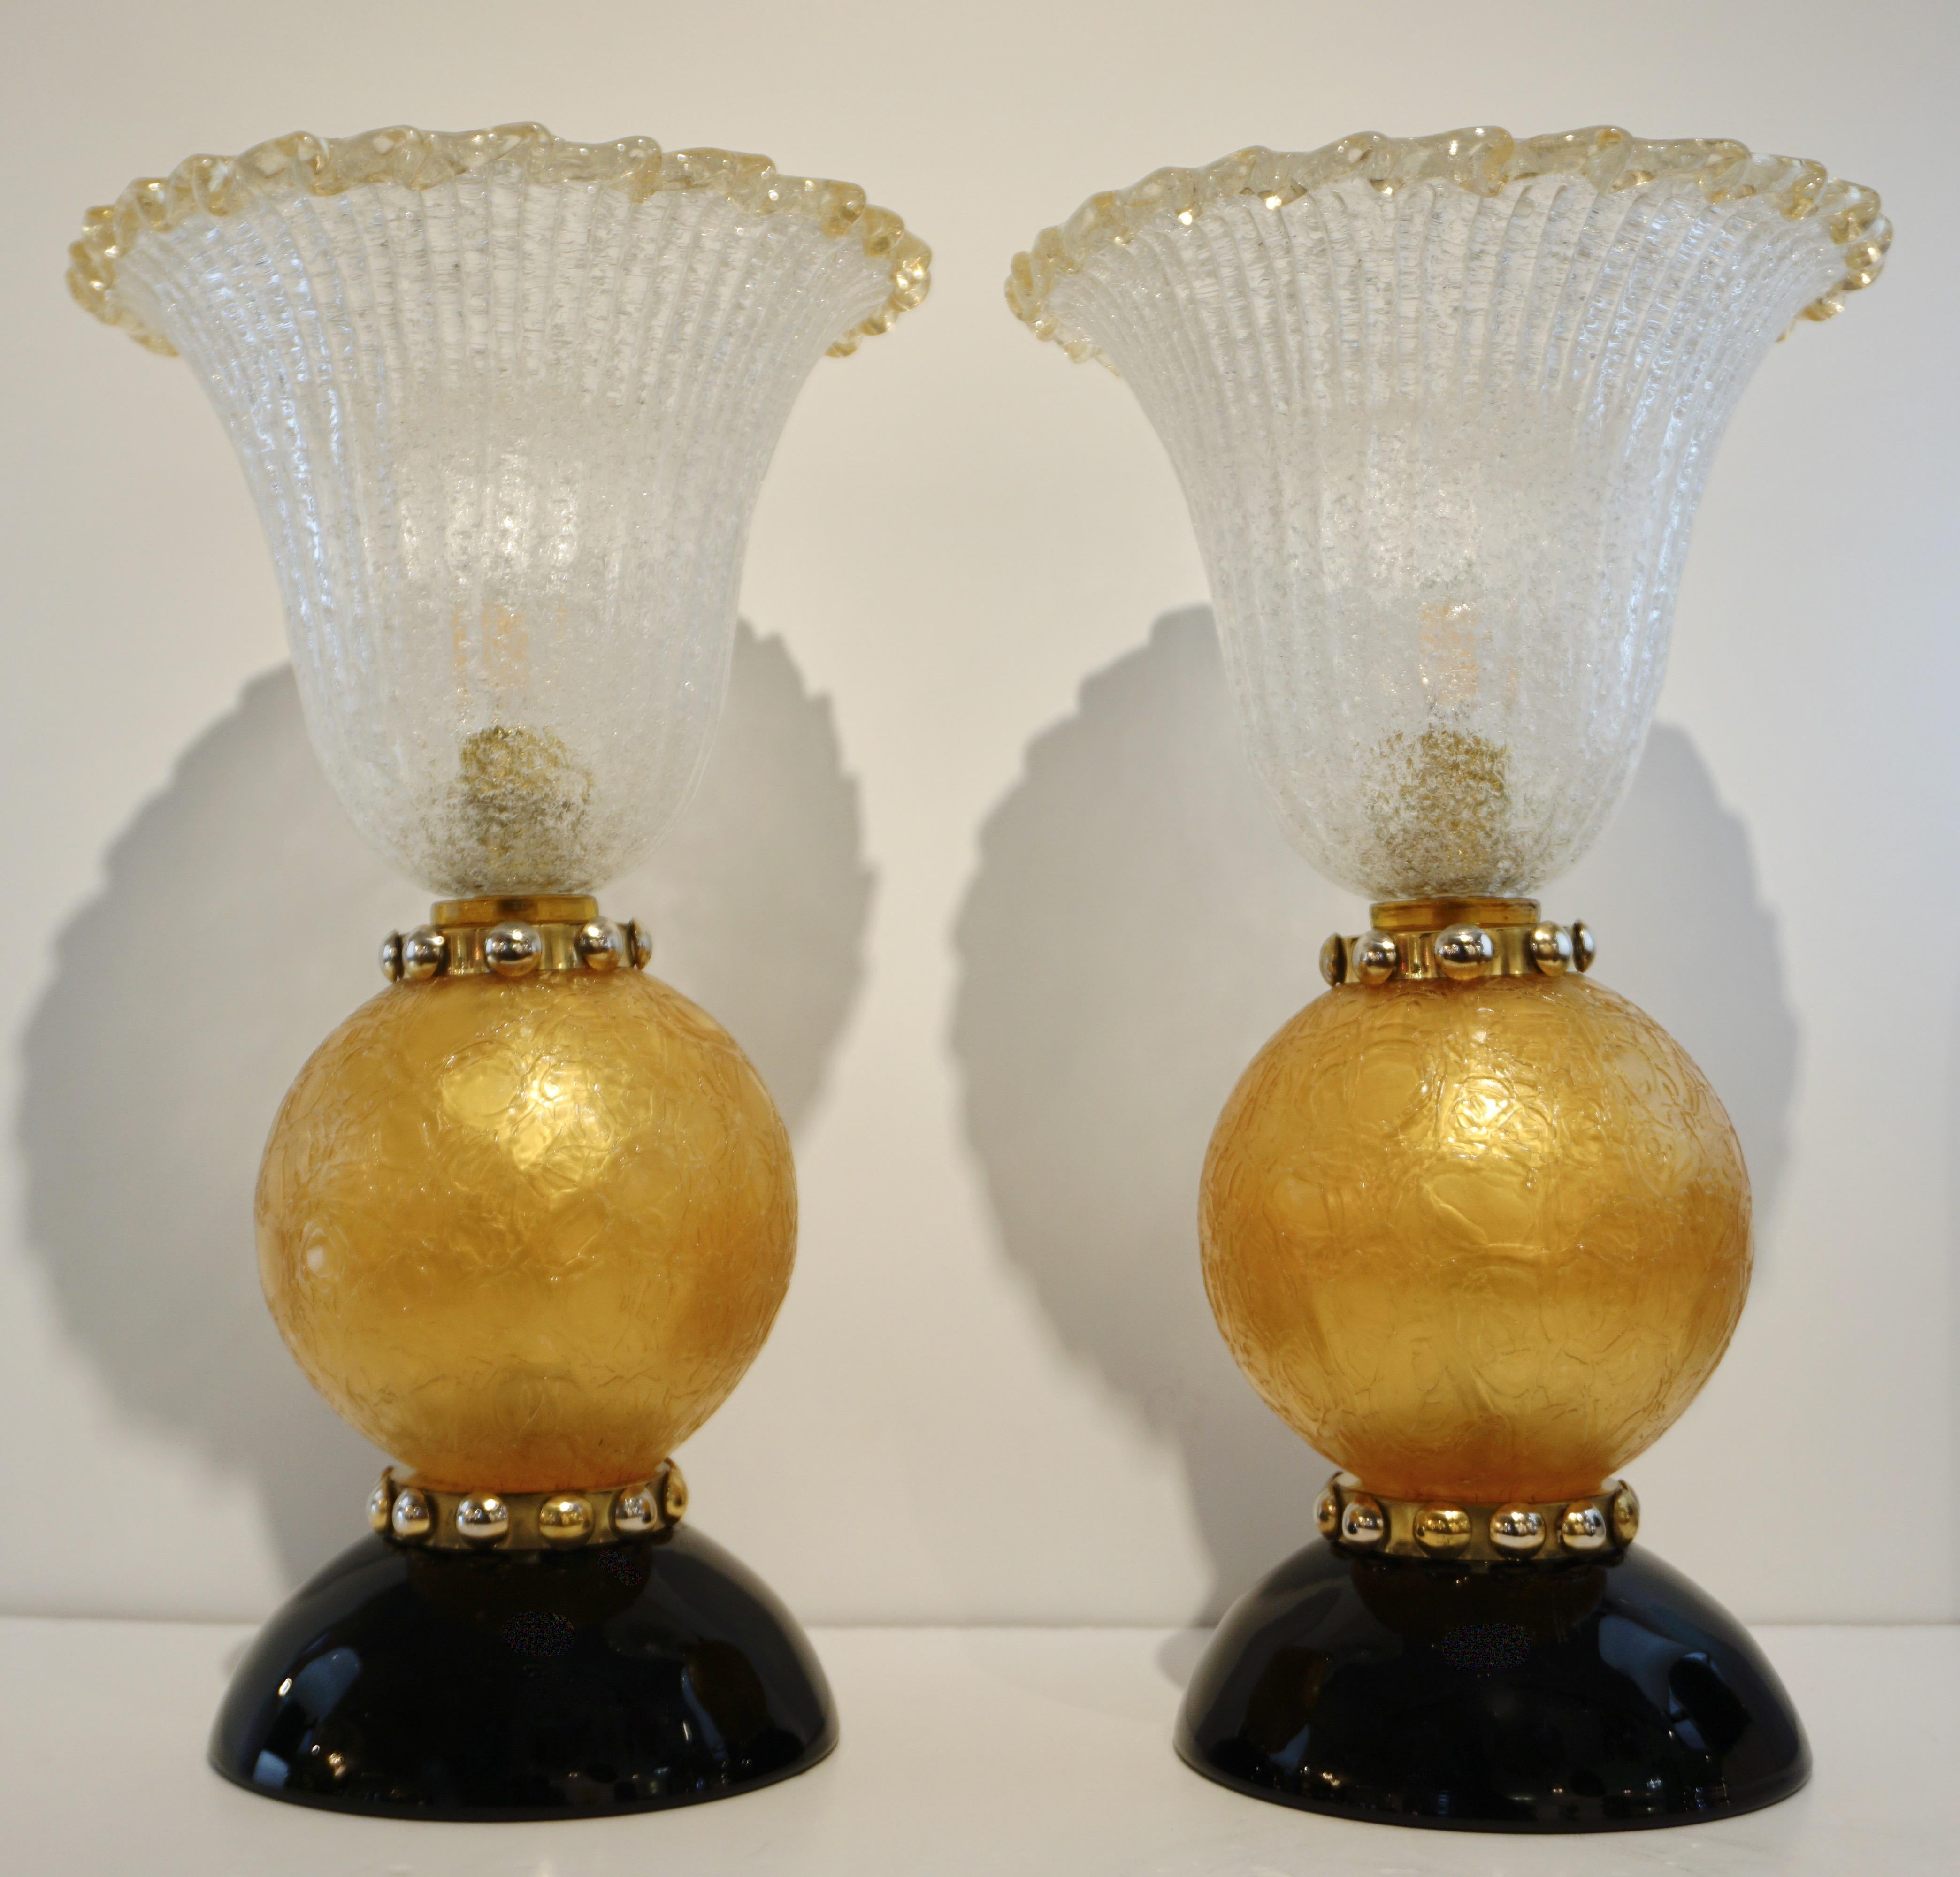 Italian Art Deco Style Gold Black Lamps with Barovier Crystal Murano Glass Shade 5